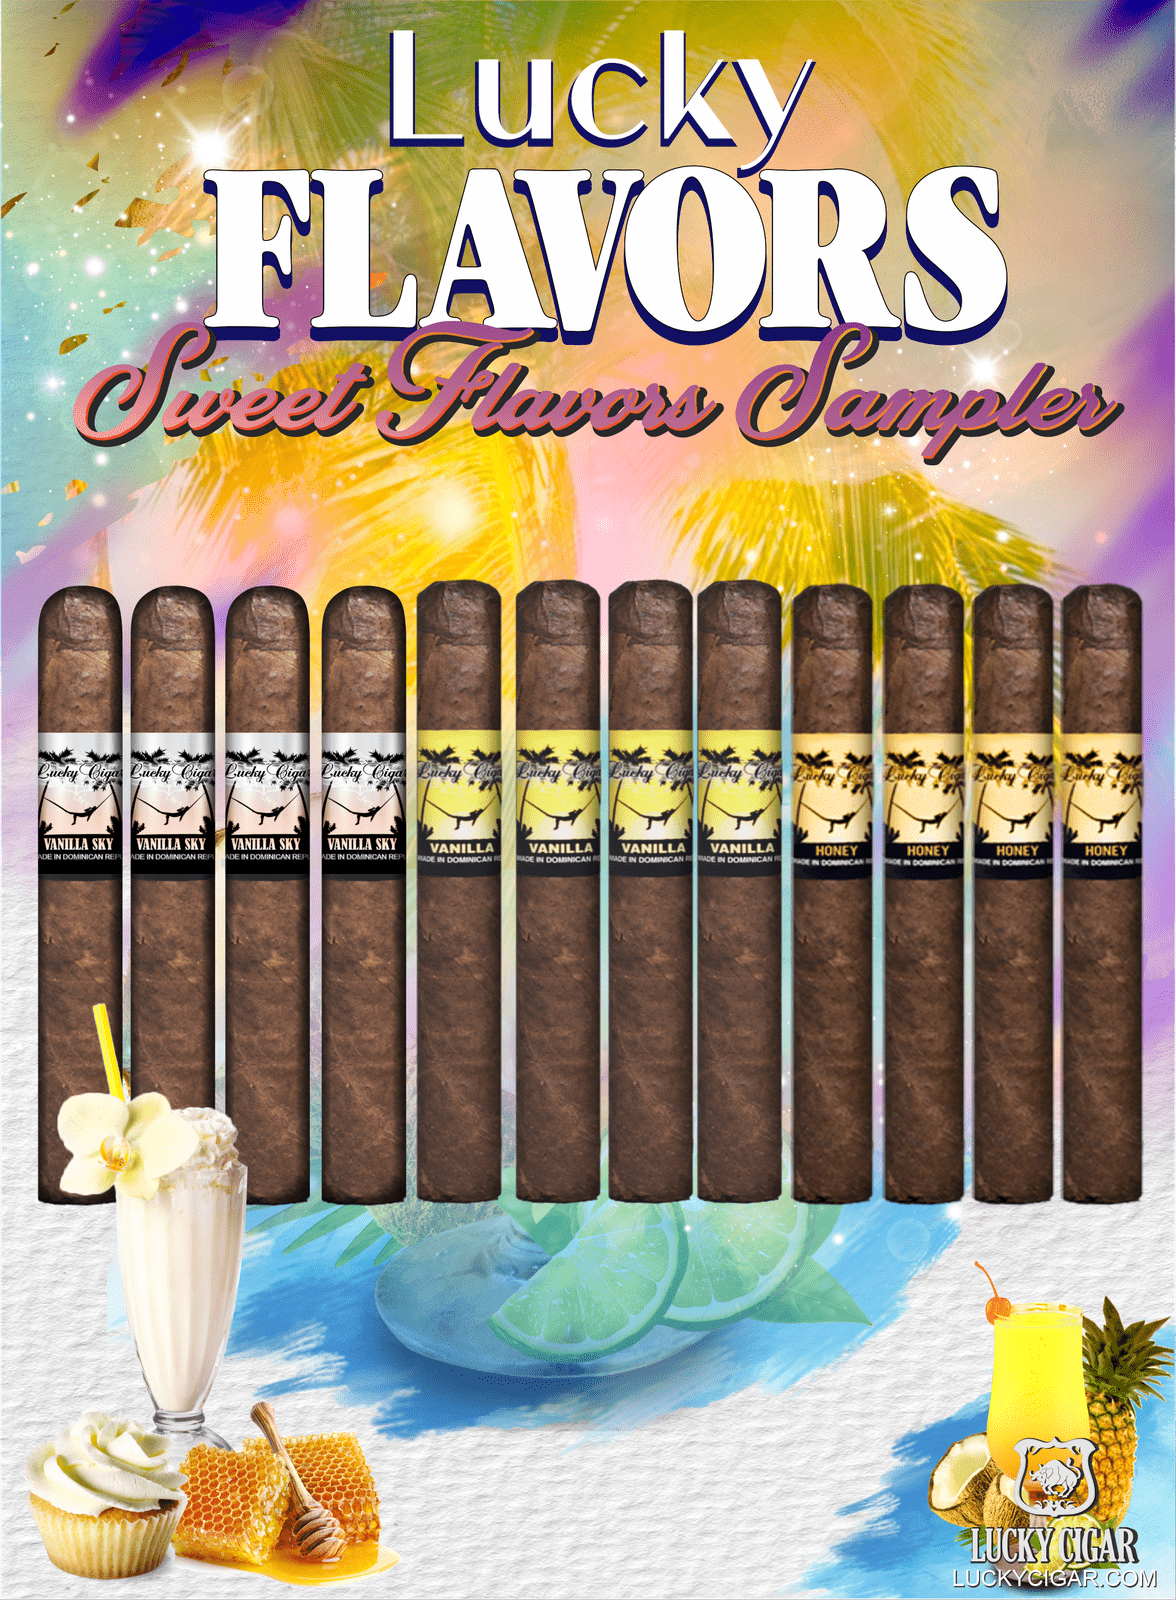 Flavored Cigars: Lucky Flavors 12 Piece Sweets Sampler - Vanilla Sky, Vanilla, Honey 4 Vanilla Sky 5x42 Cigars 4 Vanilla 5x42 Cigars 4 Honey 5x42 Cigars